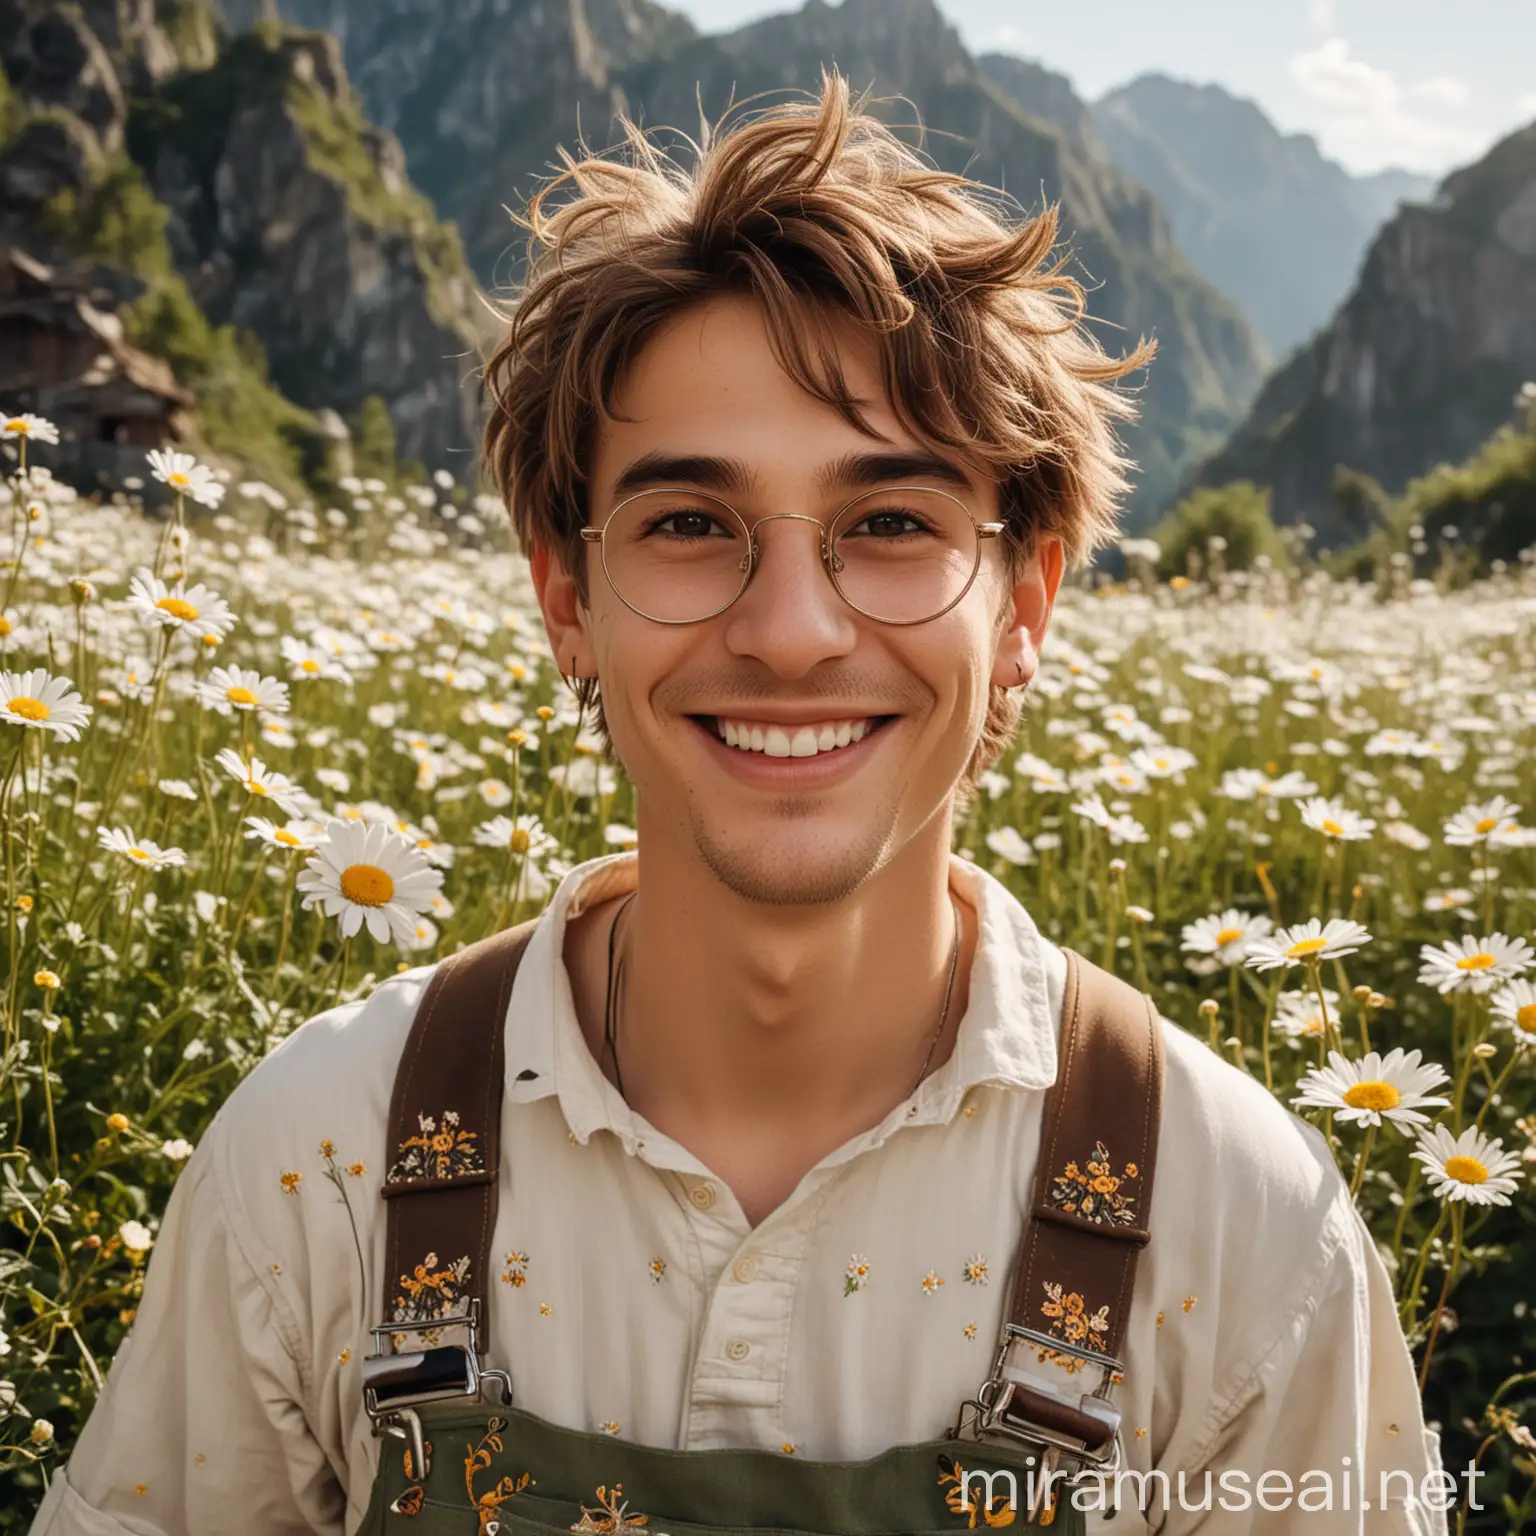 Smiling Young Adult with Elven Features and Sunthemed Accessories